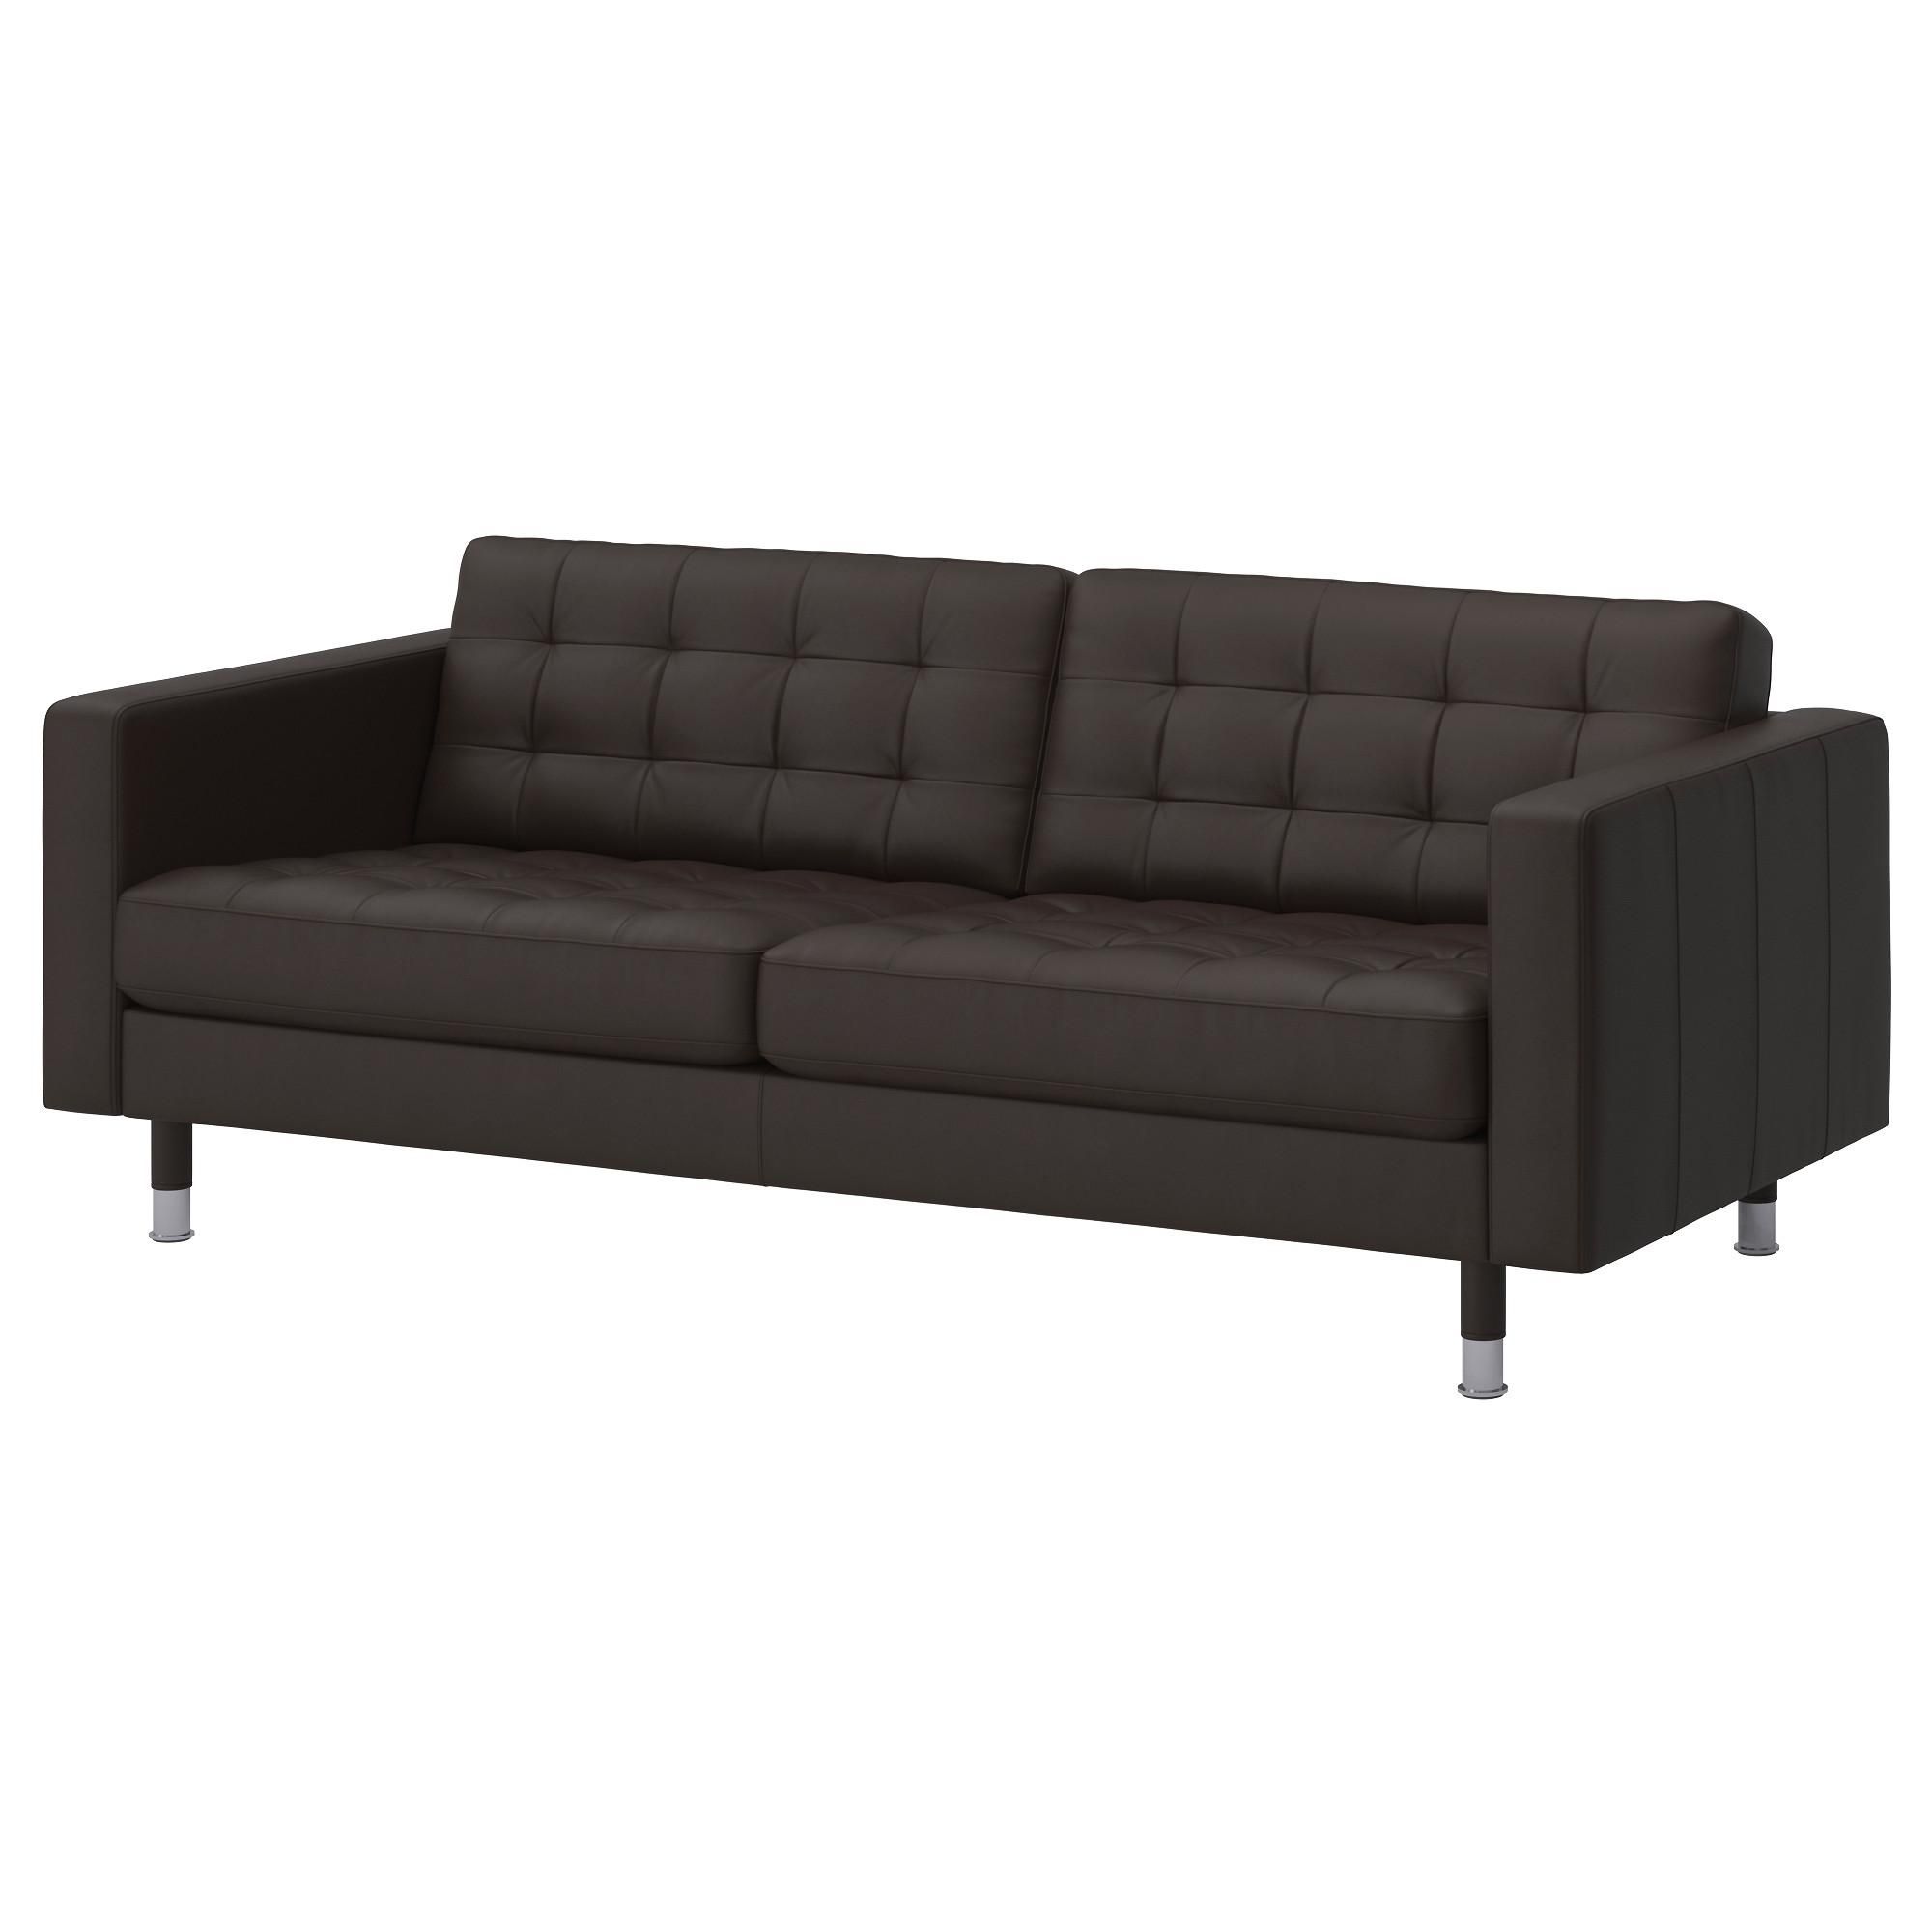 Landskrona Series – Ikea In 4 Seat Leather Sofas (View 19 of 20)